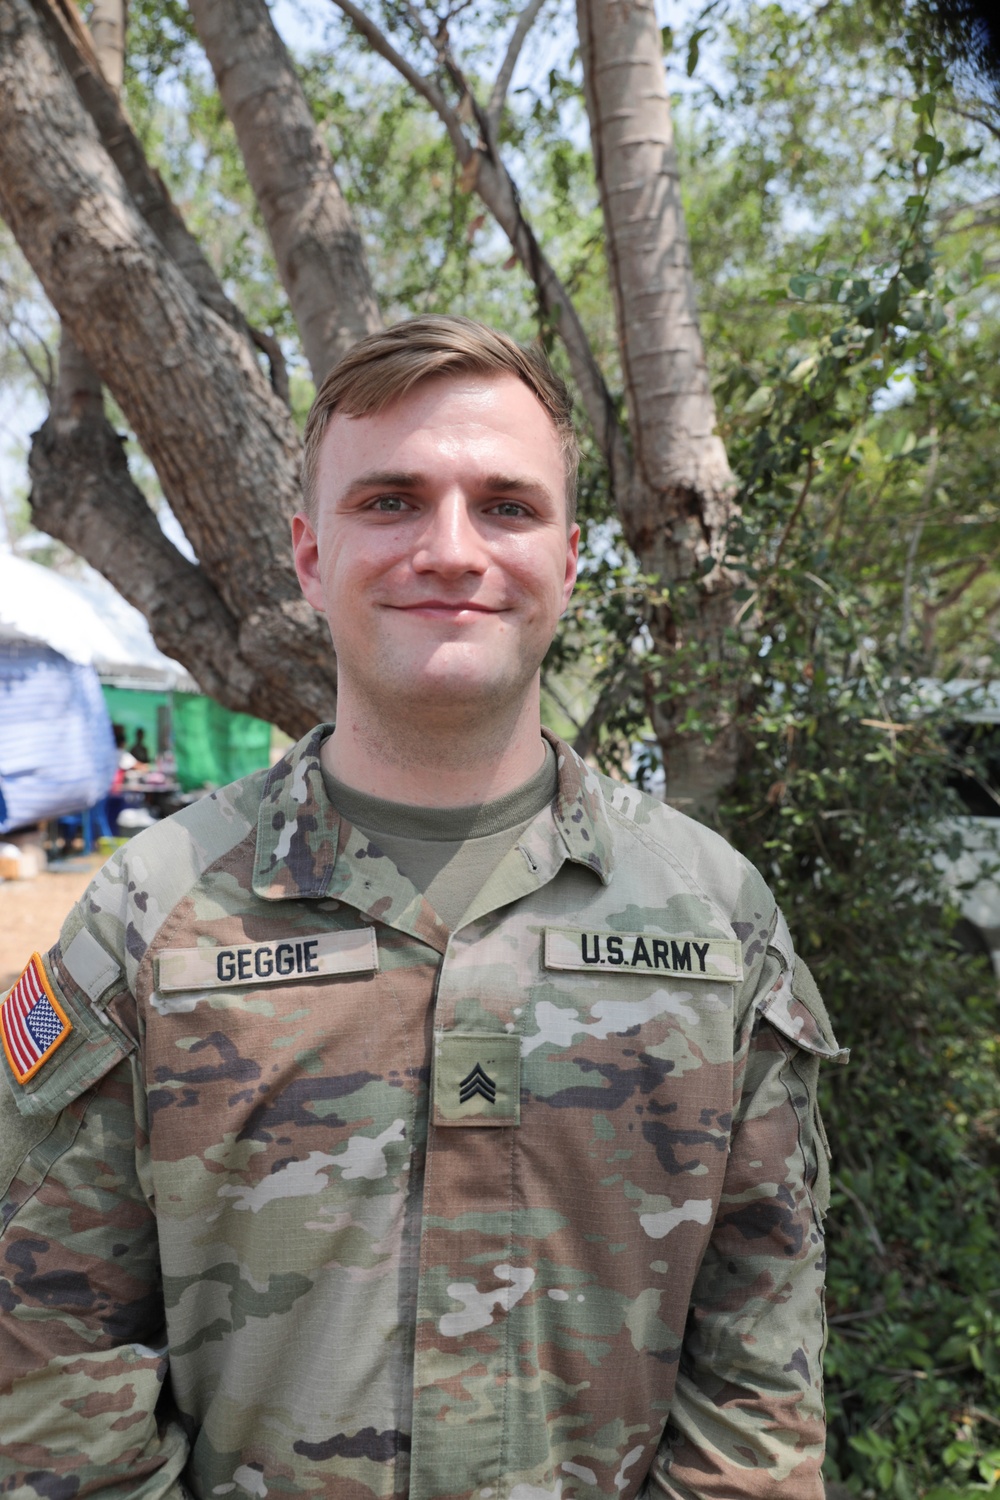 Why I Serve -  Sgt. Brayden Geggie, bassoonist for the U.S. Army Japan Band